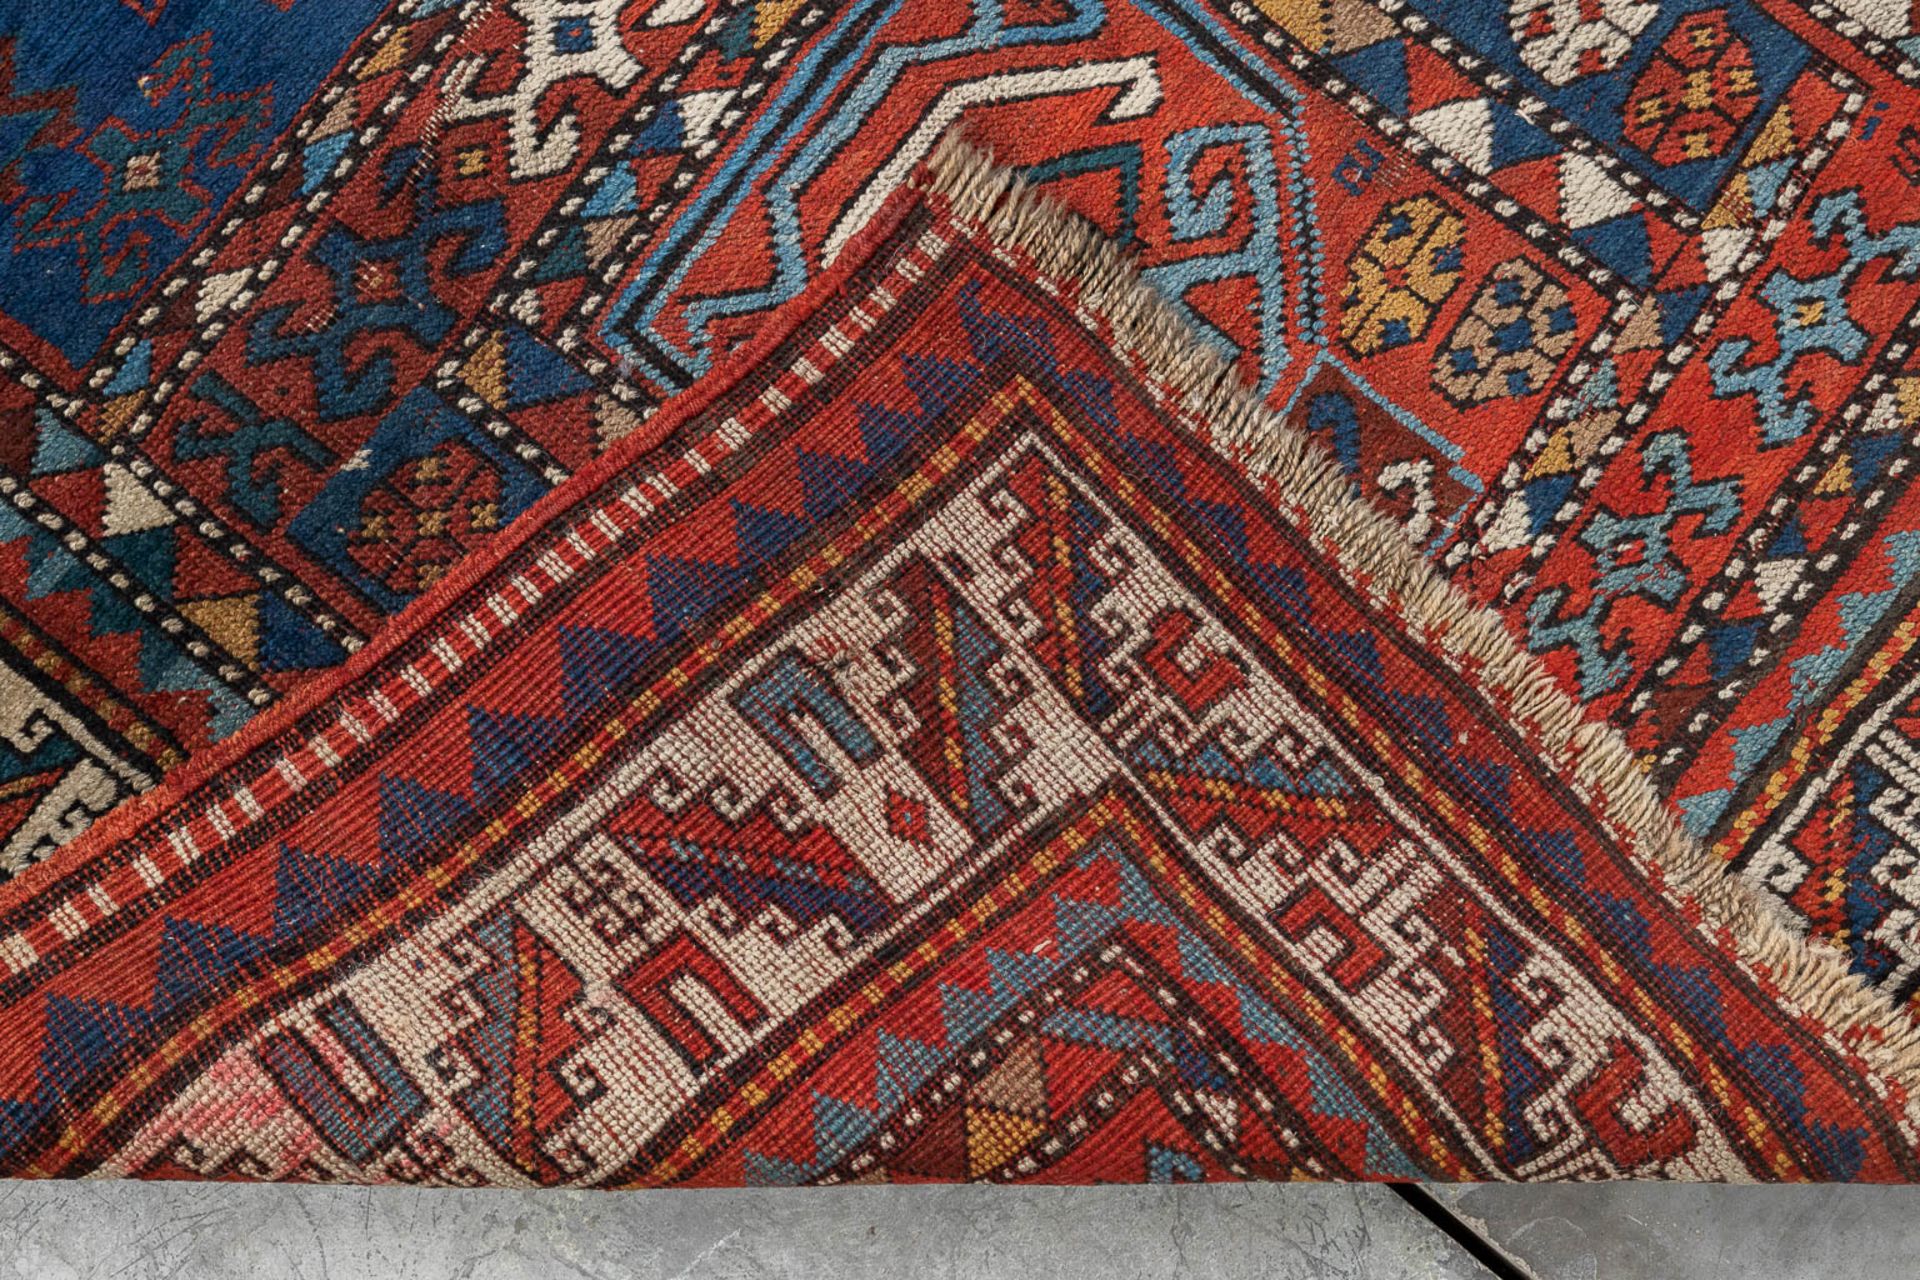 A collection of 3 Oriental hand-made carpets, probably Caucasian. (L: 157 x W: 116 cm) - Image 9 of 11